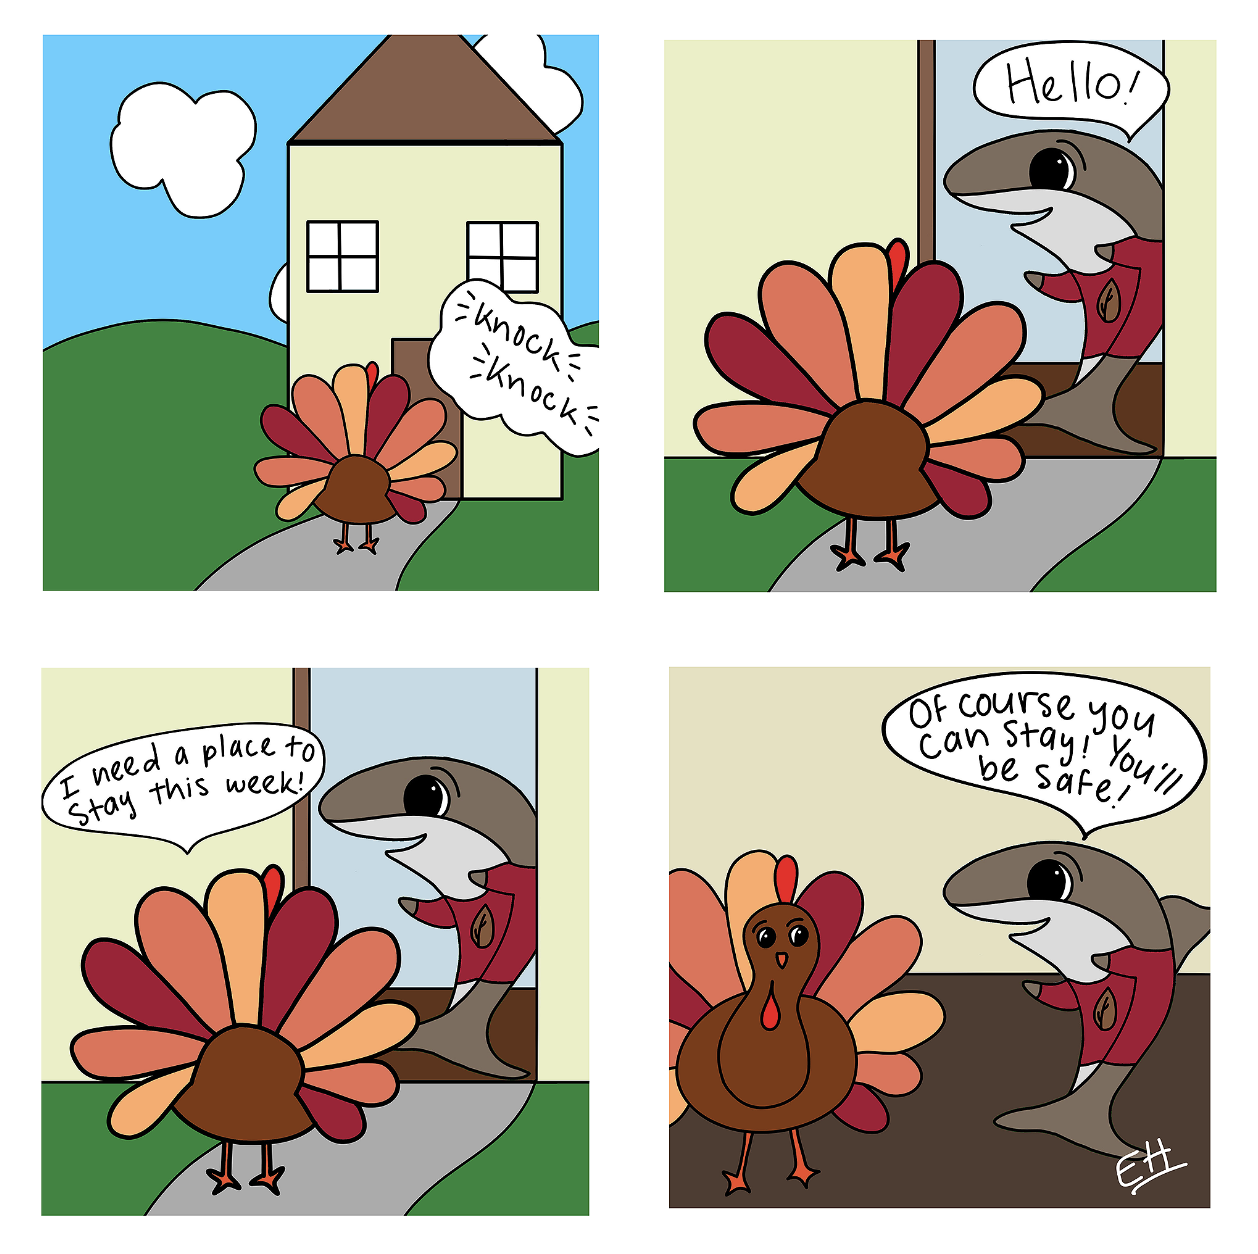 In the first panel, a turkey stands at the front door of a house. “Knock knock.” In the second panel Lawrence the shark opens the door. He says, “Hello!” In the third panel, the turkey says, “I need a place to stay this week!” In the final panel, the turkey and Lawrence are inside the house. Lawrence says, “Of course you can stay, you’ll be safe here!”